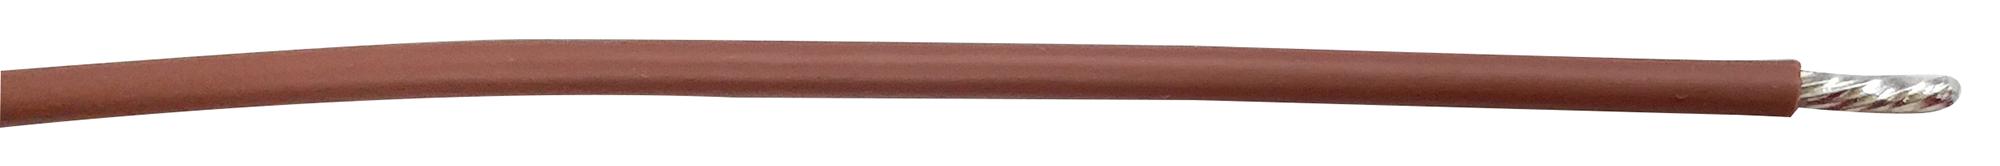 PP002522 CABLE WIRE, 18AWG, BROWN, 305M PRO POWER